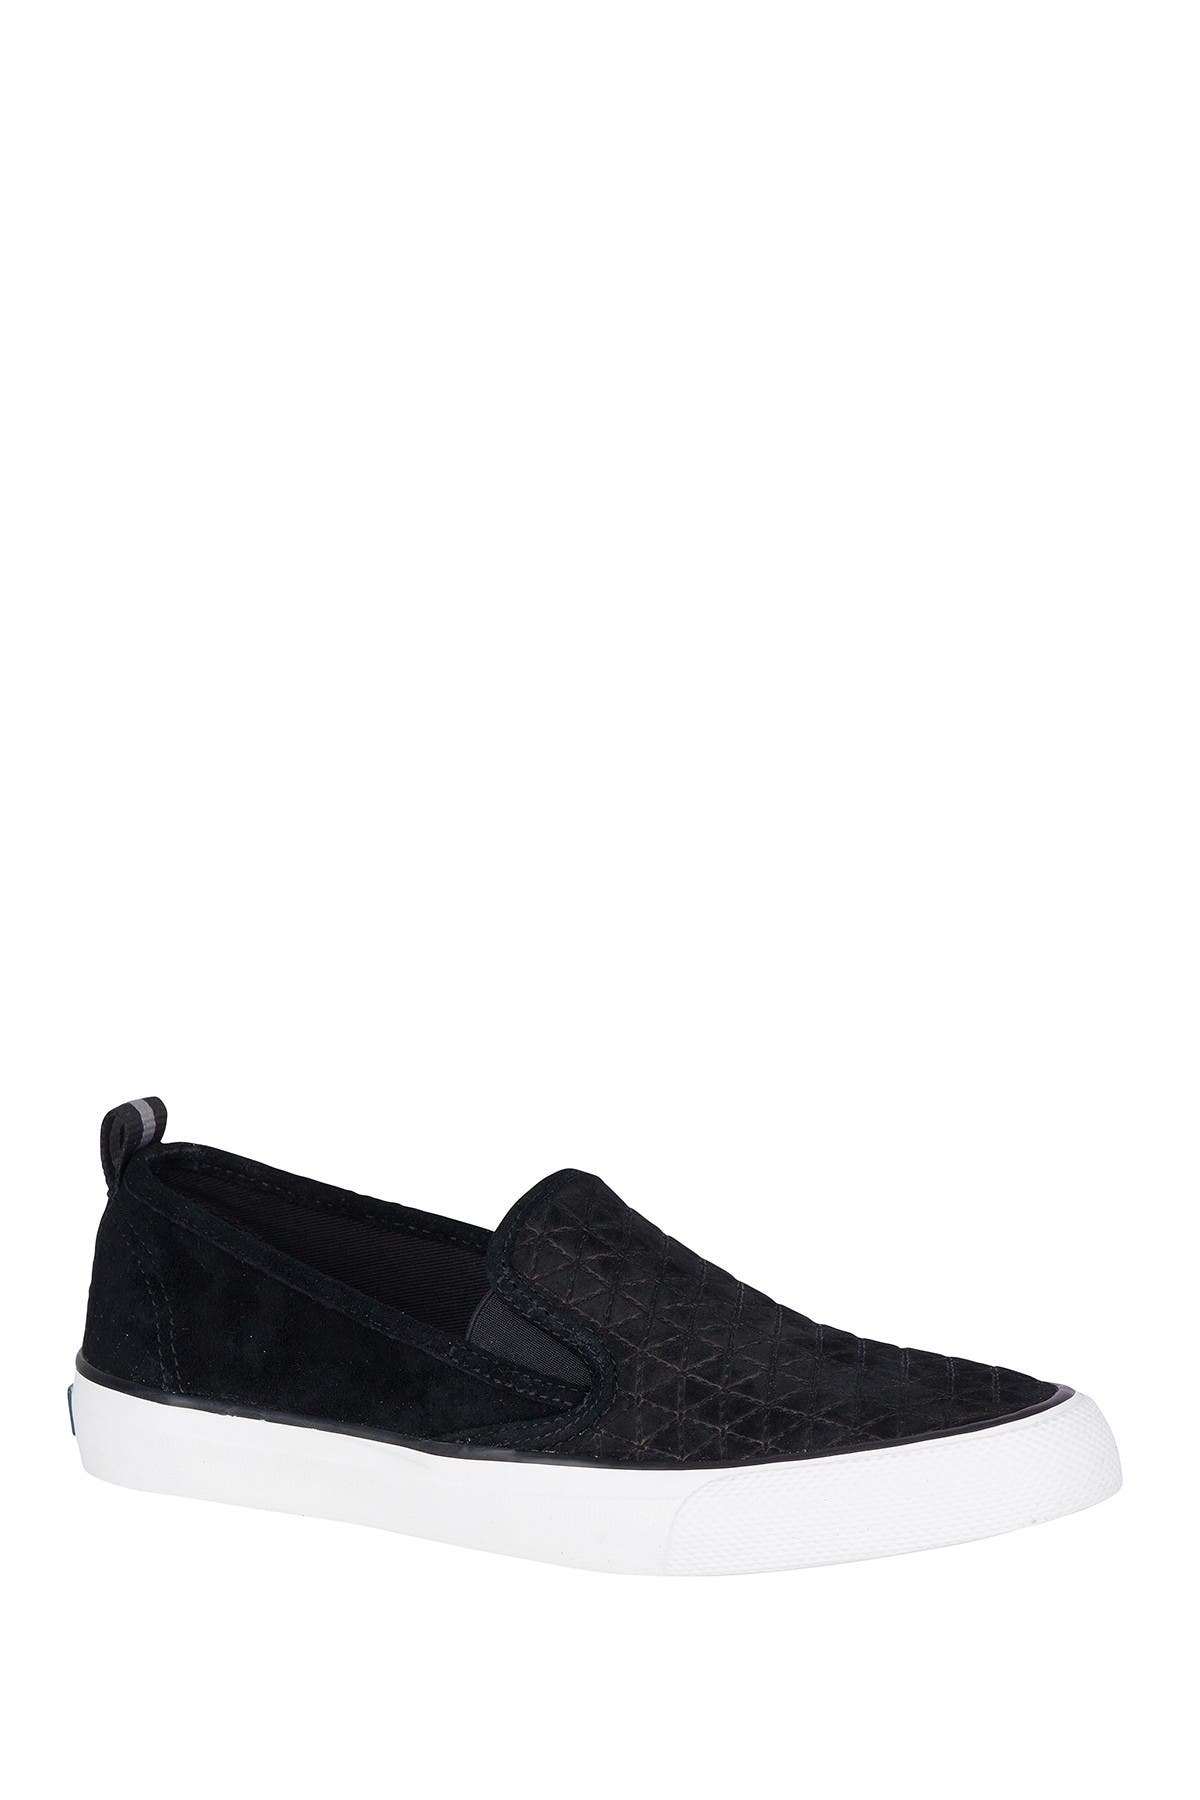 Sperry | Seaside Quilted Slip-On 